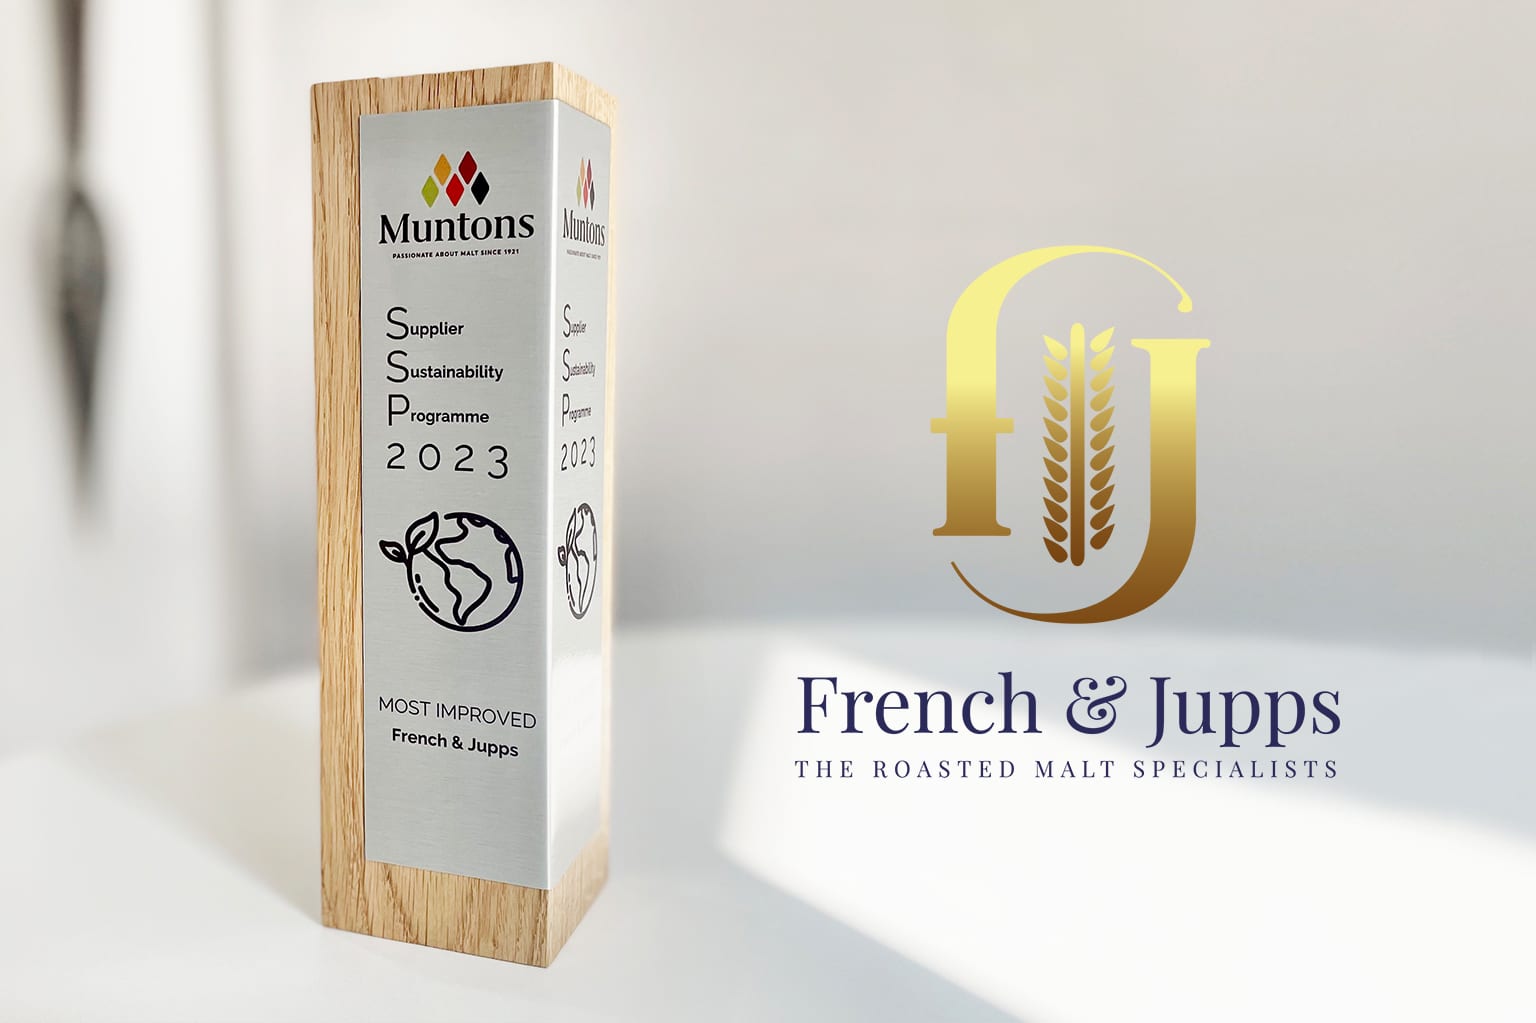 Muntons Malt Supplier Sustainability Programme French and Jupps